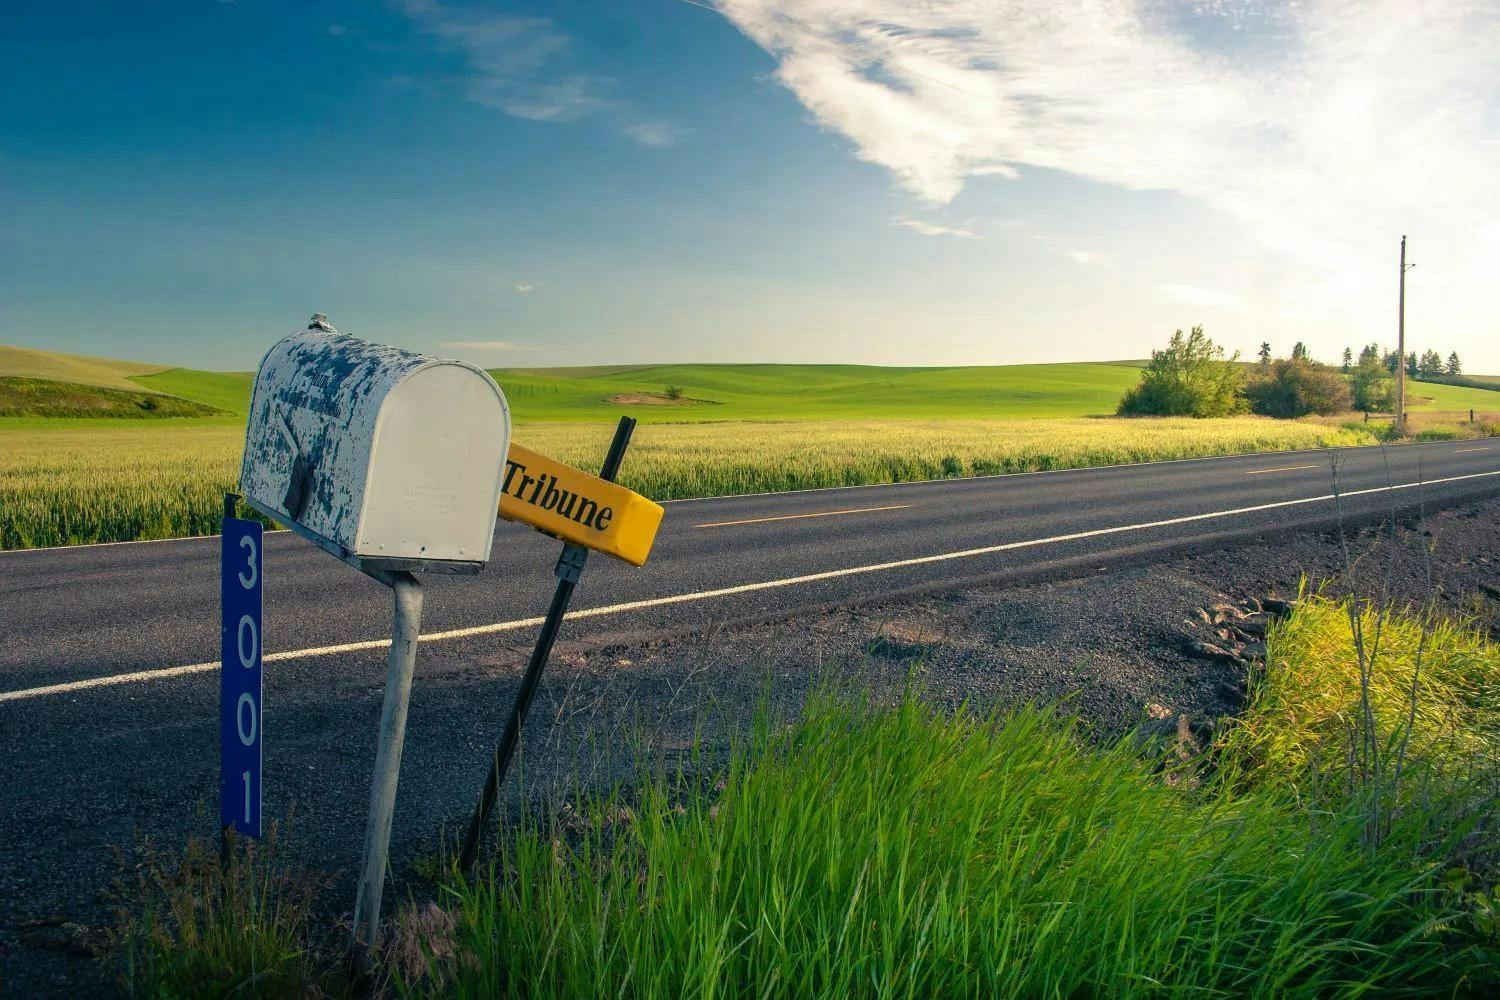 rural deliveries for ecommerce can be a challenge - letterbox